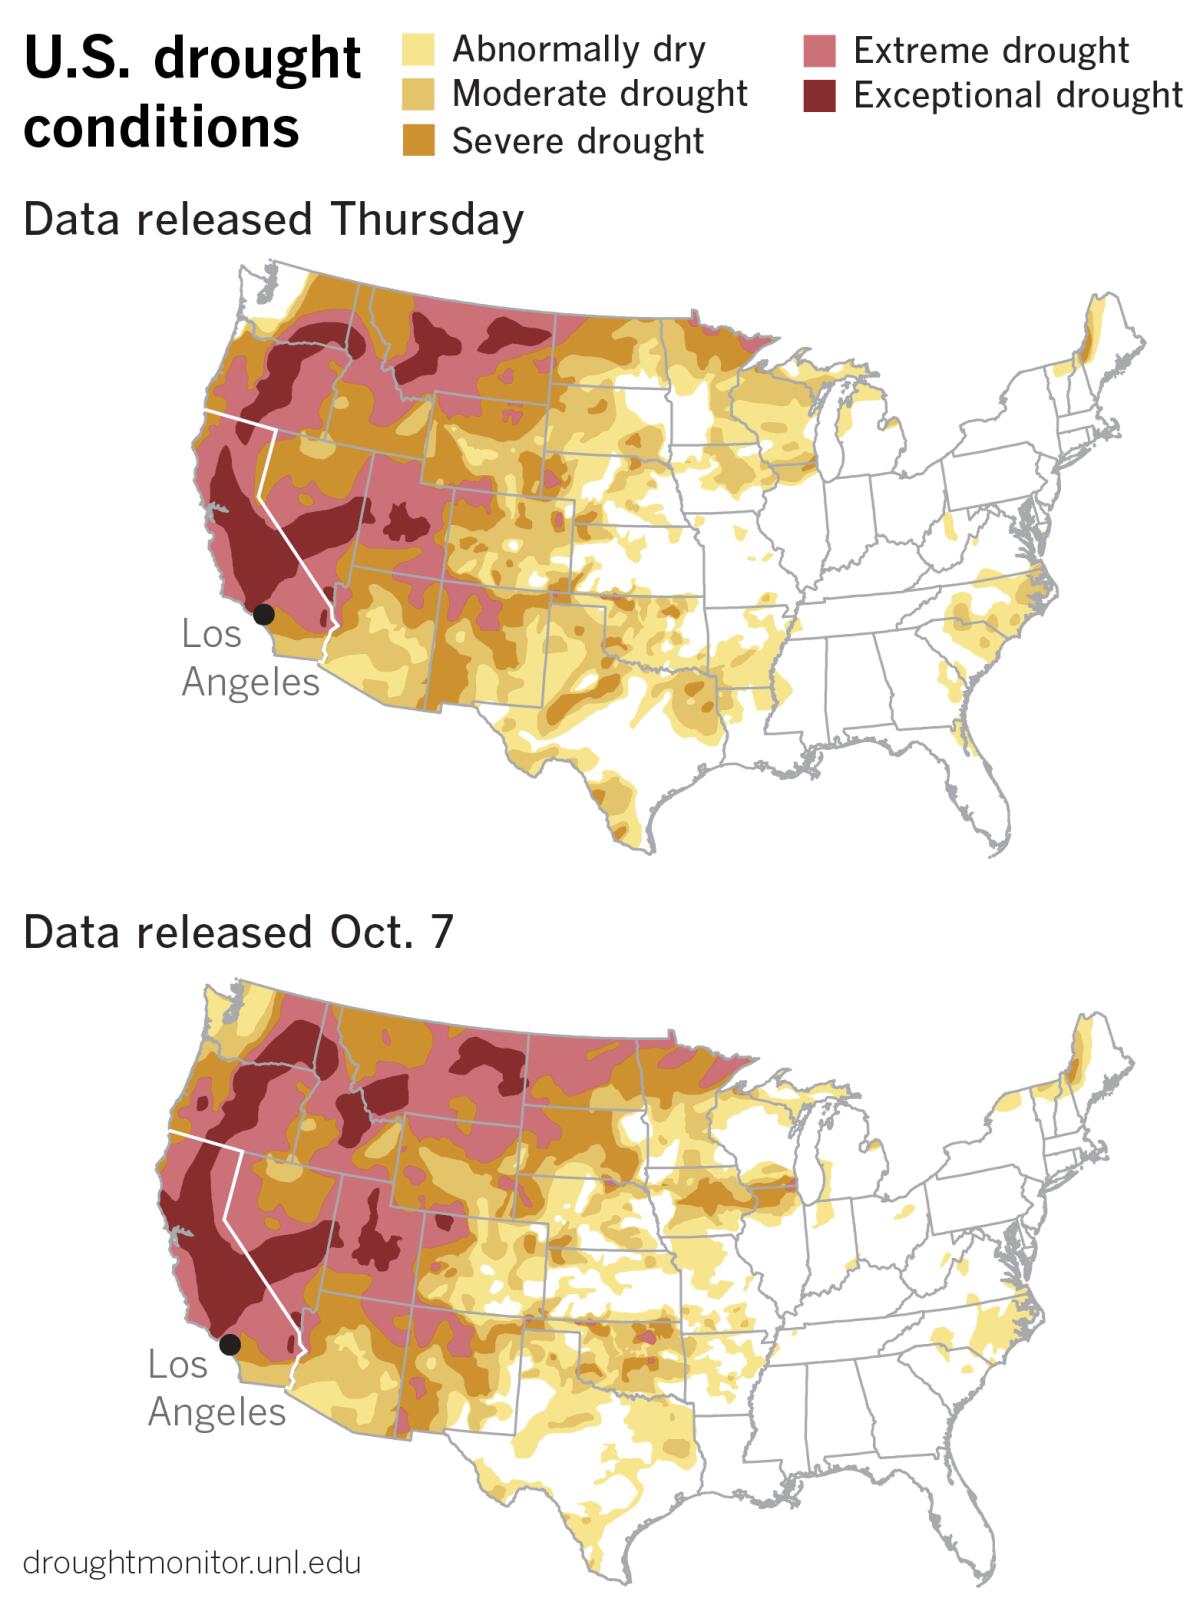 Comparison of U.S. Drought Monitor maps from Thursday and a month ago.